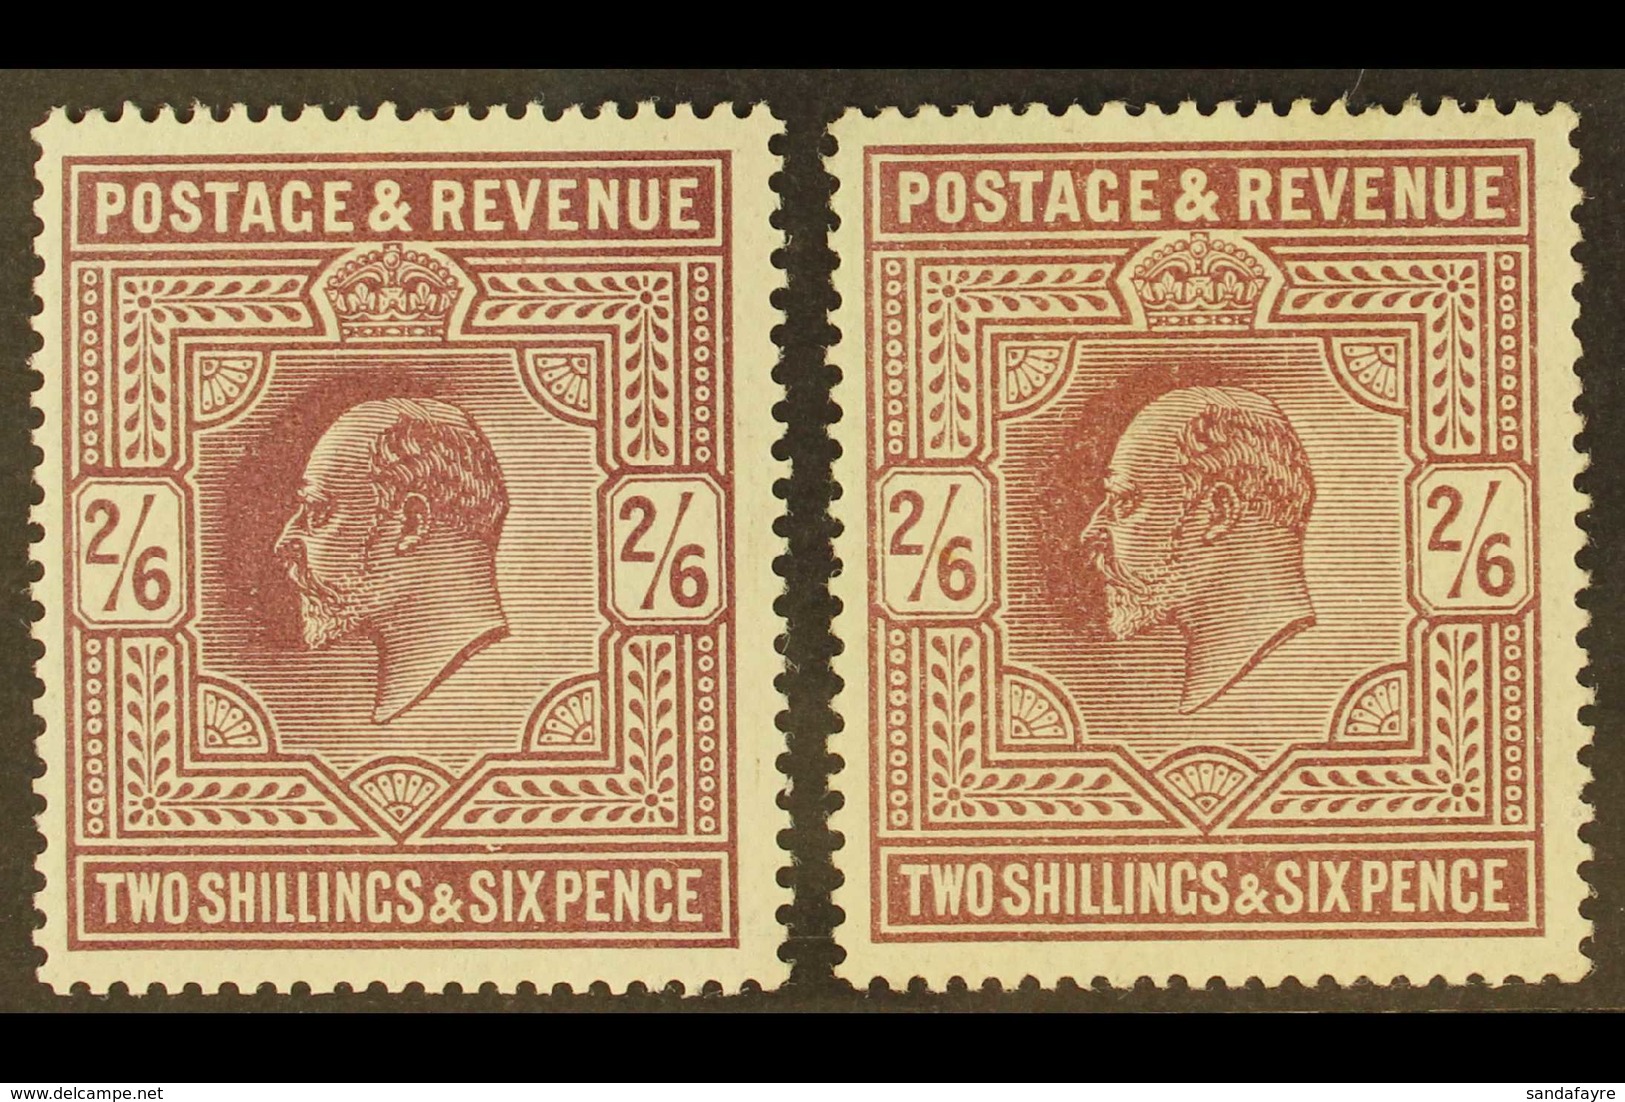 1911-13  2s6d Perf 14, Somerset House Printing On Ordinary Paper, SG315/317, Two Different Specialised Shades (dull Redd - Zonder Classificatie